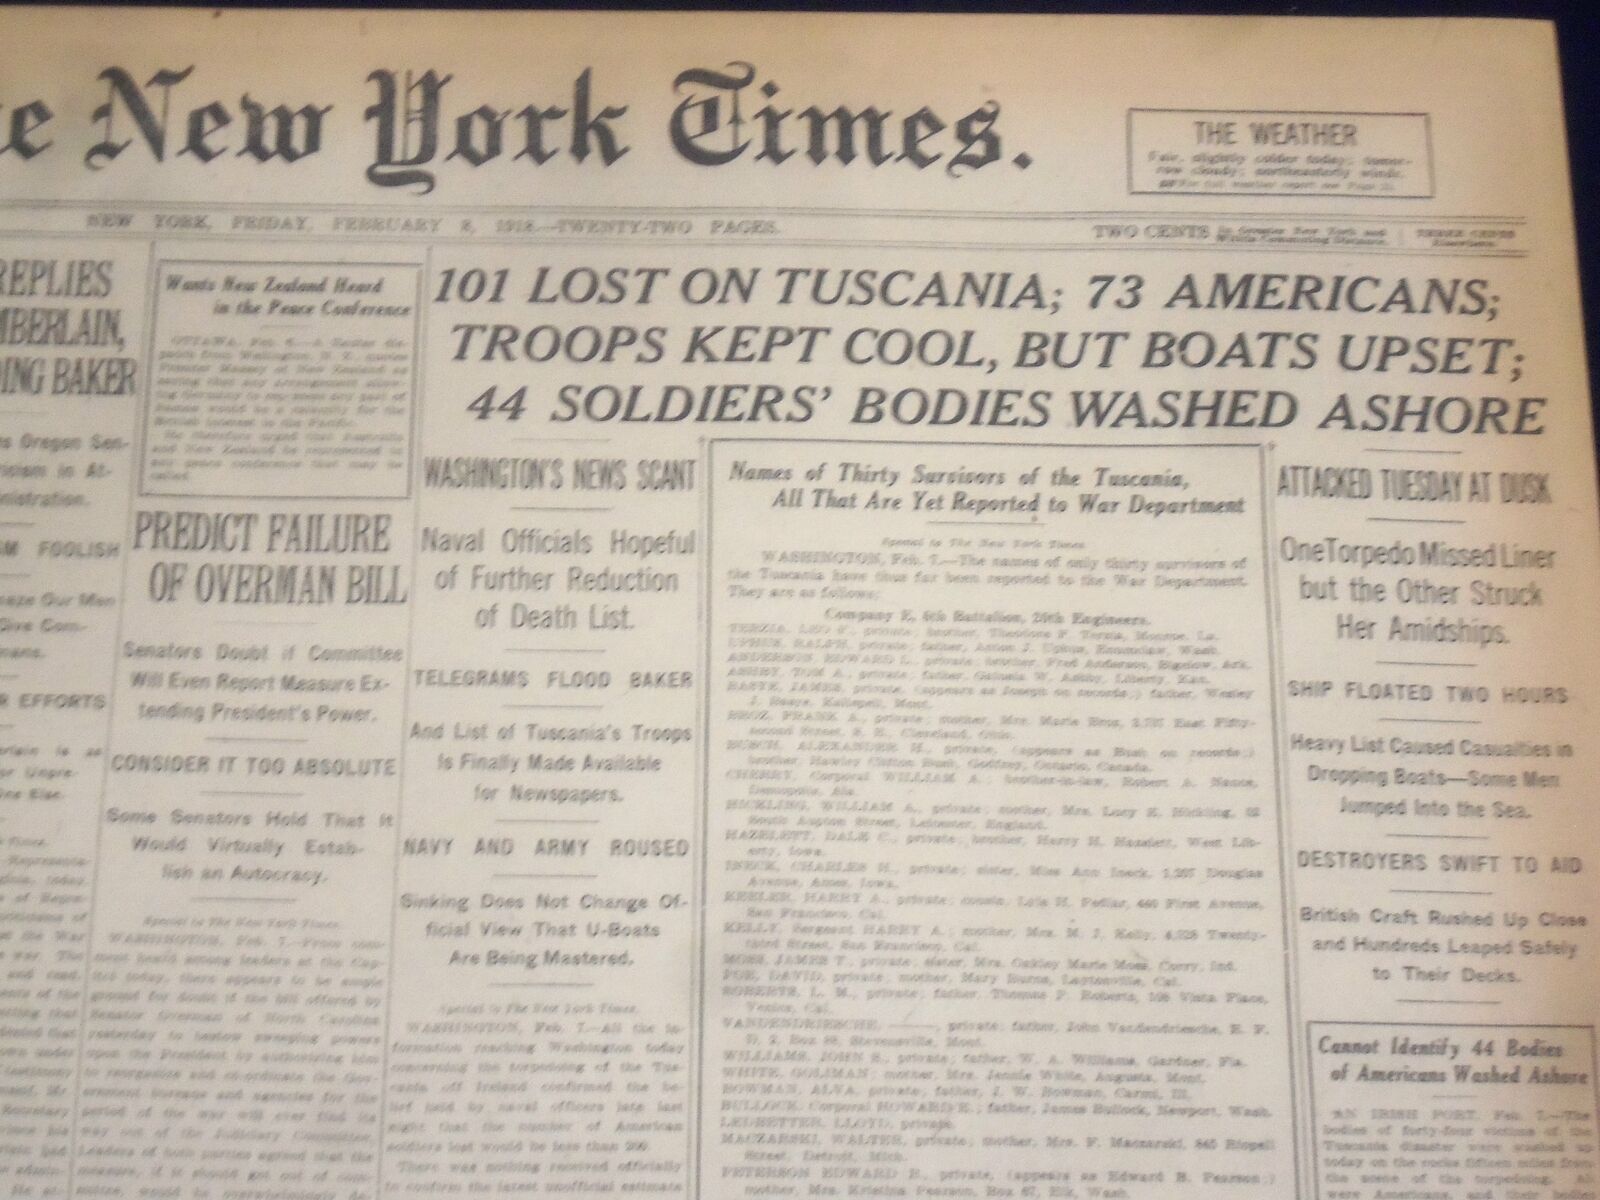 1918 FEBRUARY 8 NEW YORK TIMES - 101 LOST ON TUSCANIA, 73 AMERICANS - NT 8234